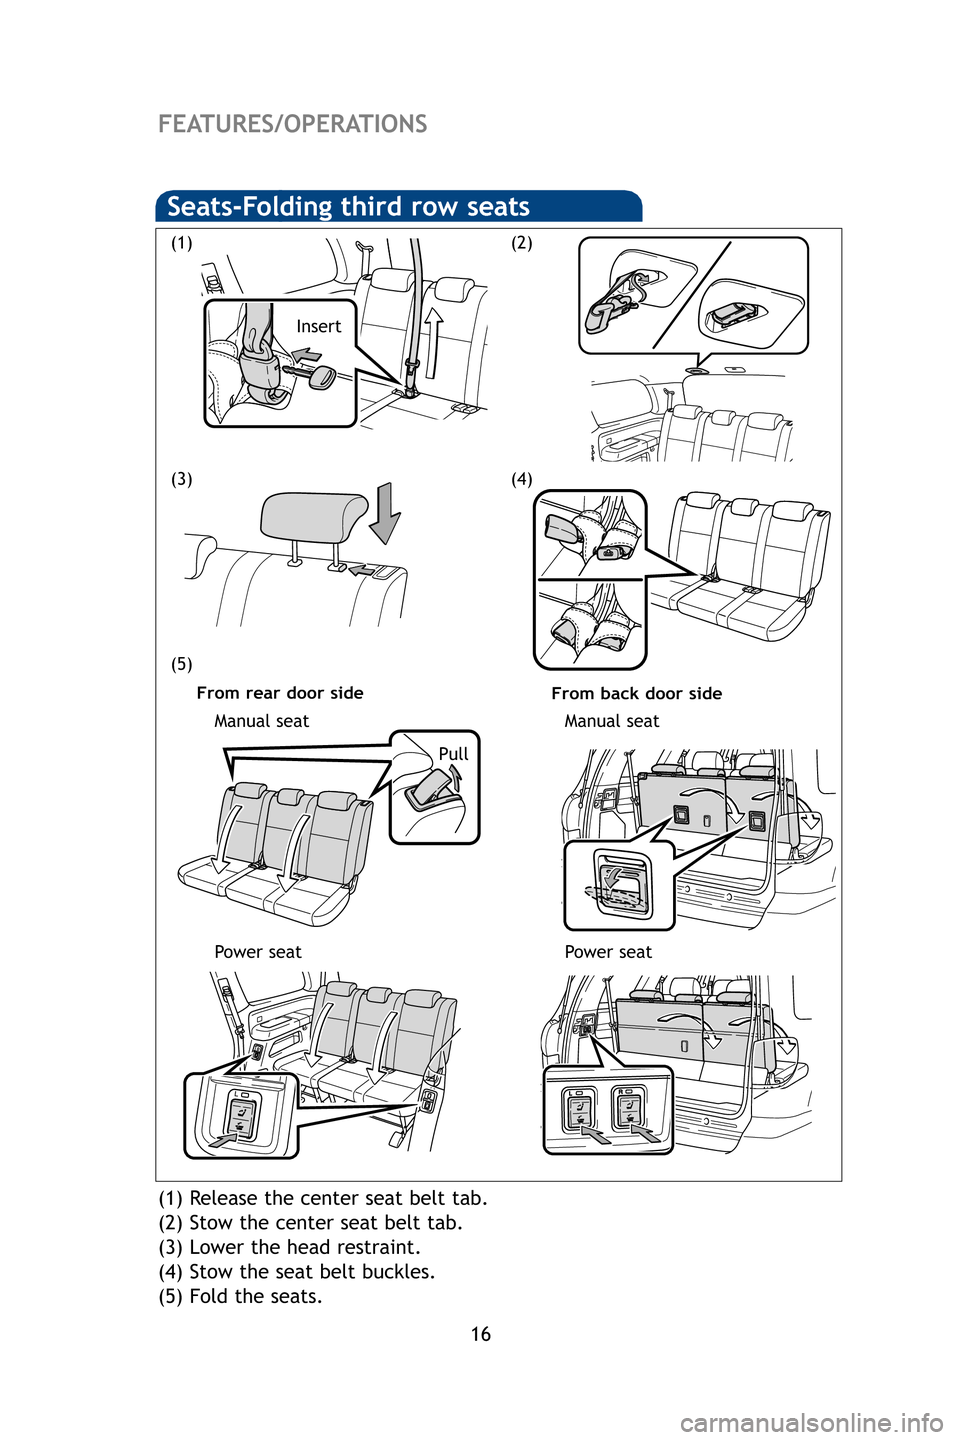 TOYOTA SEQUOIA 2009 2.G Quick Reference Guide 16
FEATURES/OPERATIONS
(1) Release the center seat belt tab.
(2) Stow the center seat belt tab.
(3) Lower the head restraint.
(4) Stow the seat belt buckles.
(5) Fold the seats.
(1)
(5)
(3)
(2)
Seats-